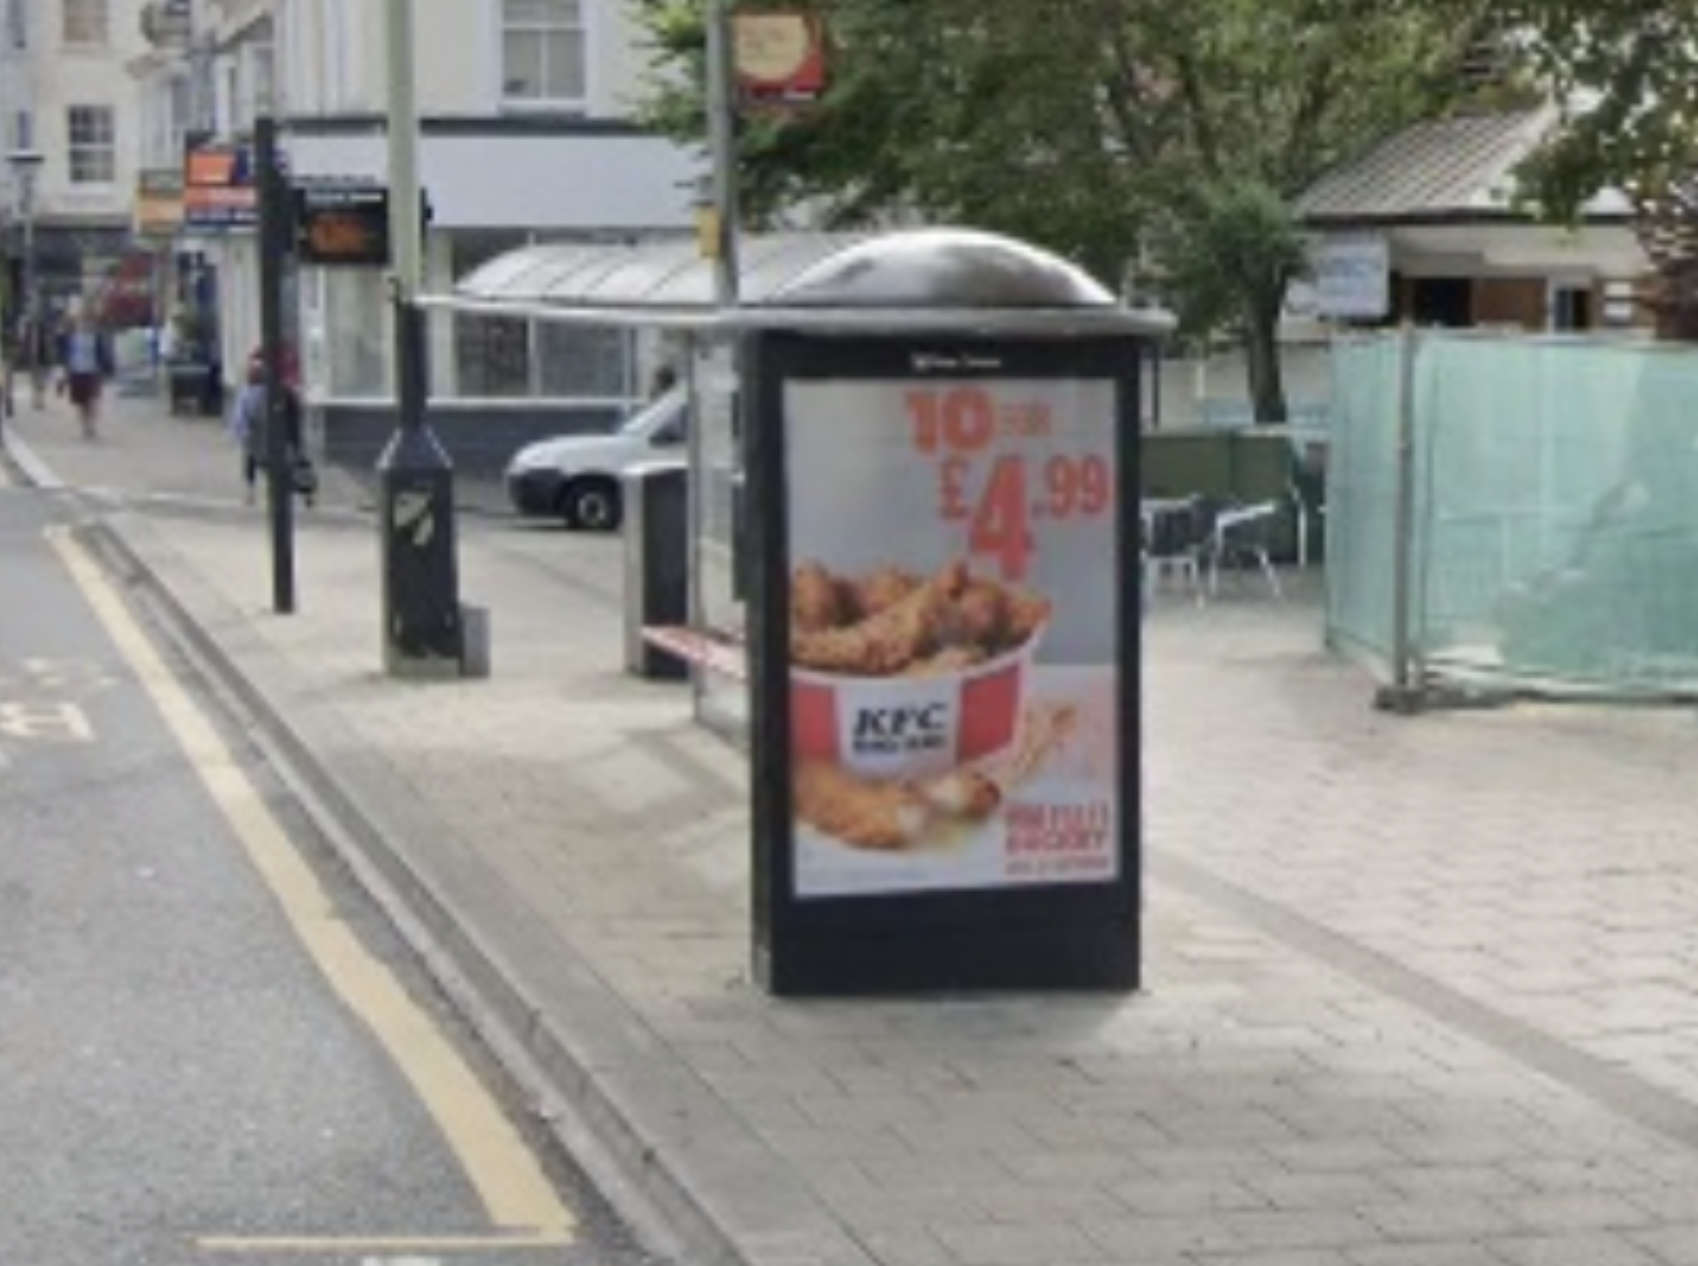 ban-on-junk-food-ads-in-brighton-hove-wins-backing-of-health-chiefs